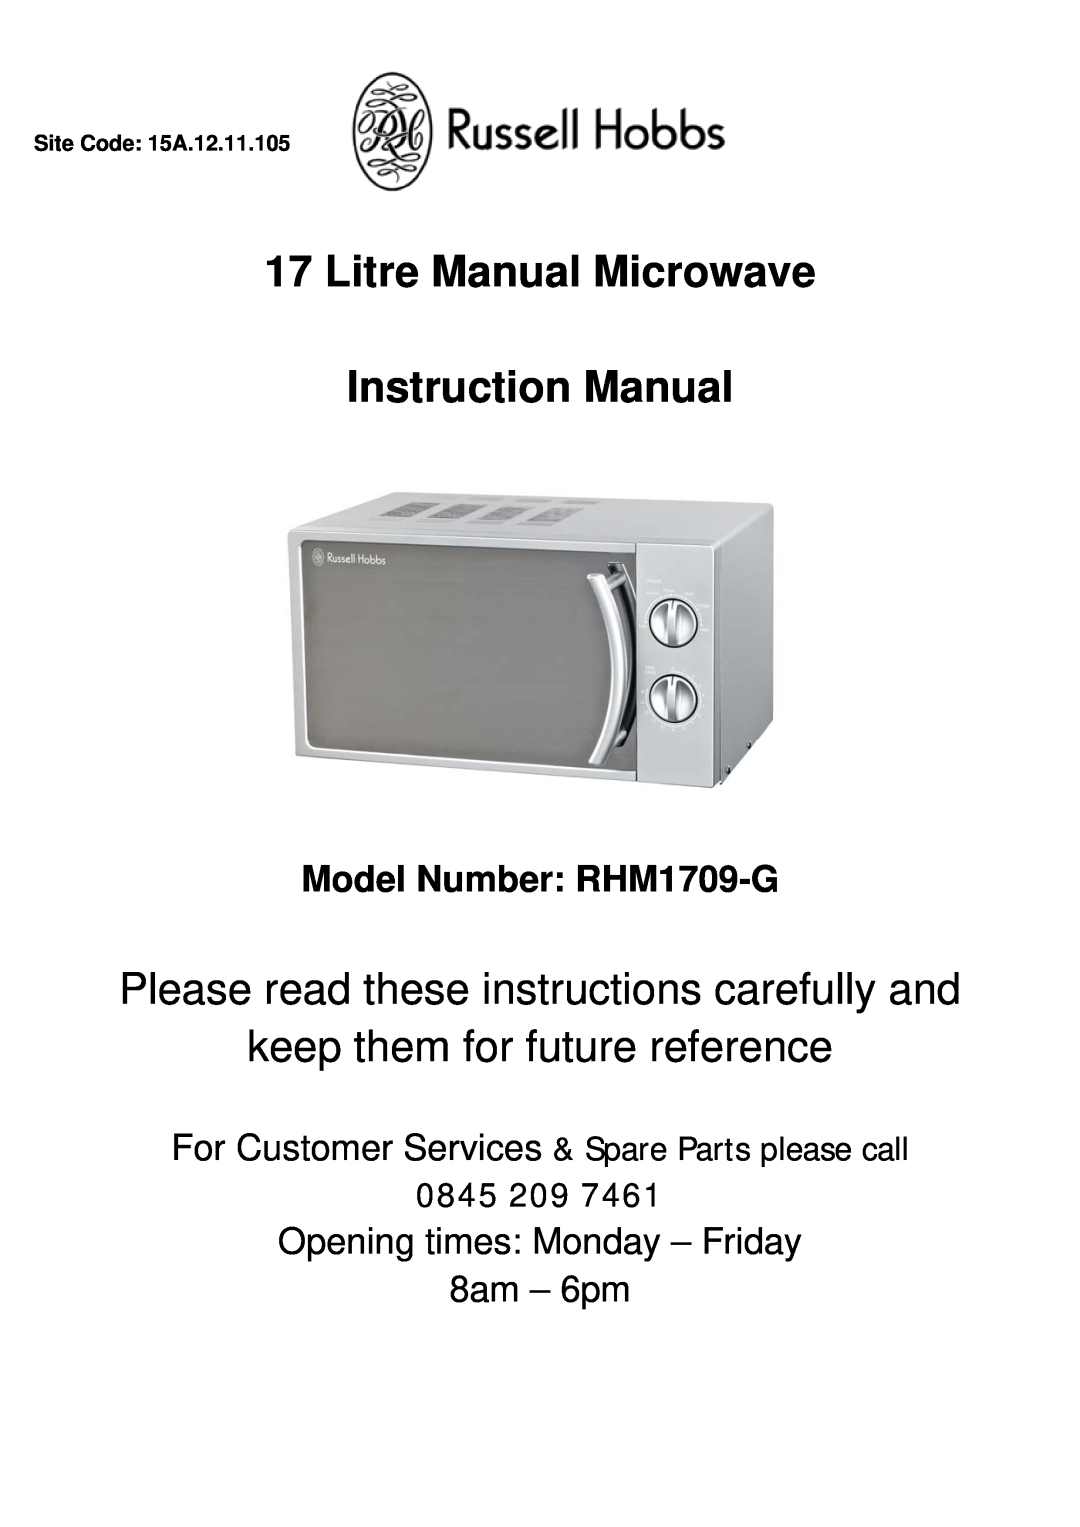 Russell Hobbs RHM1709-G instruction manual 0845, Site Code 15A.12.11.105, Please read these instructions carefully and 